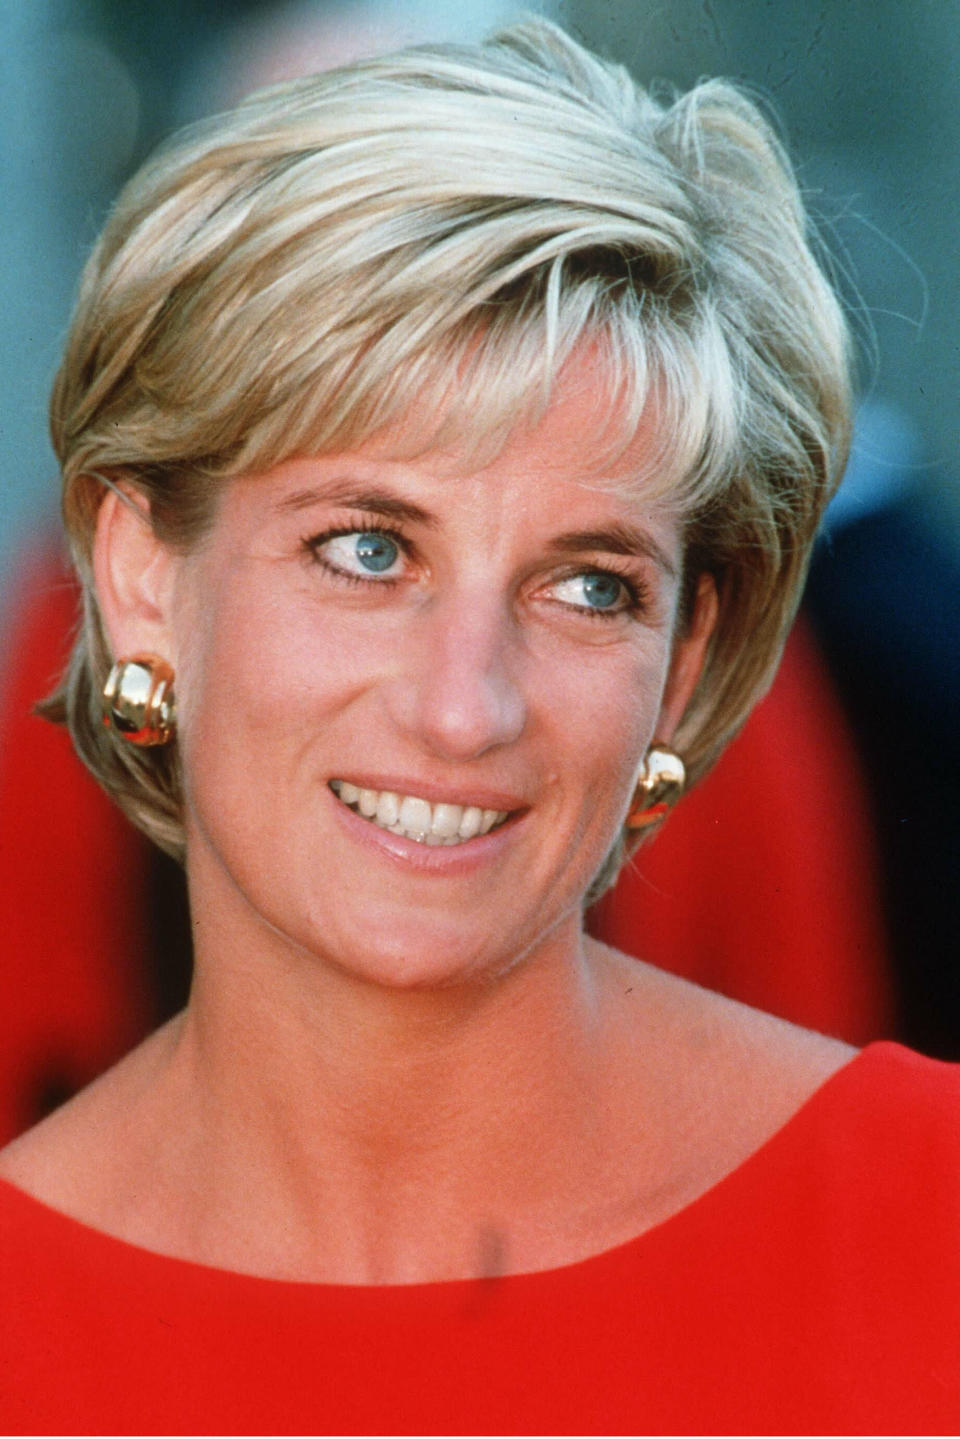 <p>Her last engagement in Britain was at the North Park Children’s A&E Unit on July 21st, 1997. For the occasion, Princess Diana donned a striking red shift dress and sported a shorter hairstyle with bangs. <em>[Photo: PA]</em> </p>